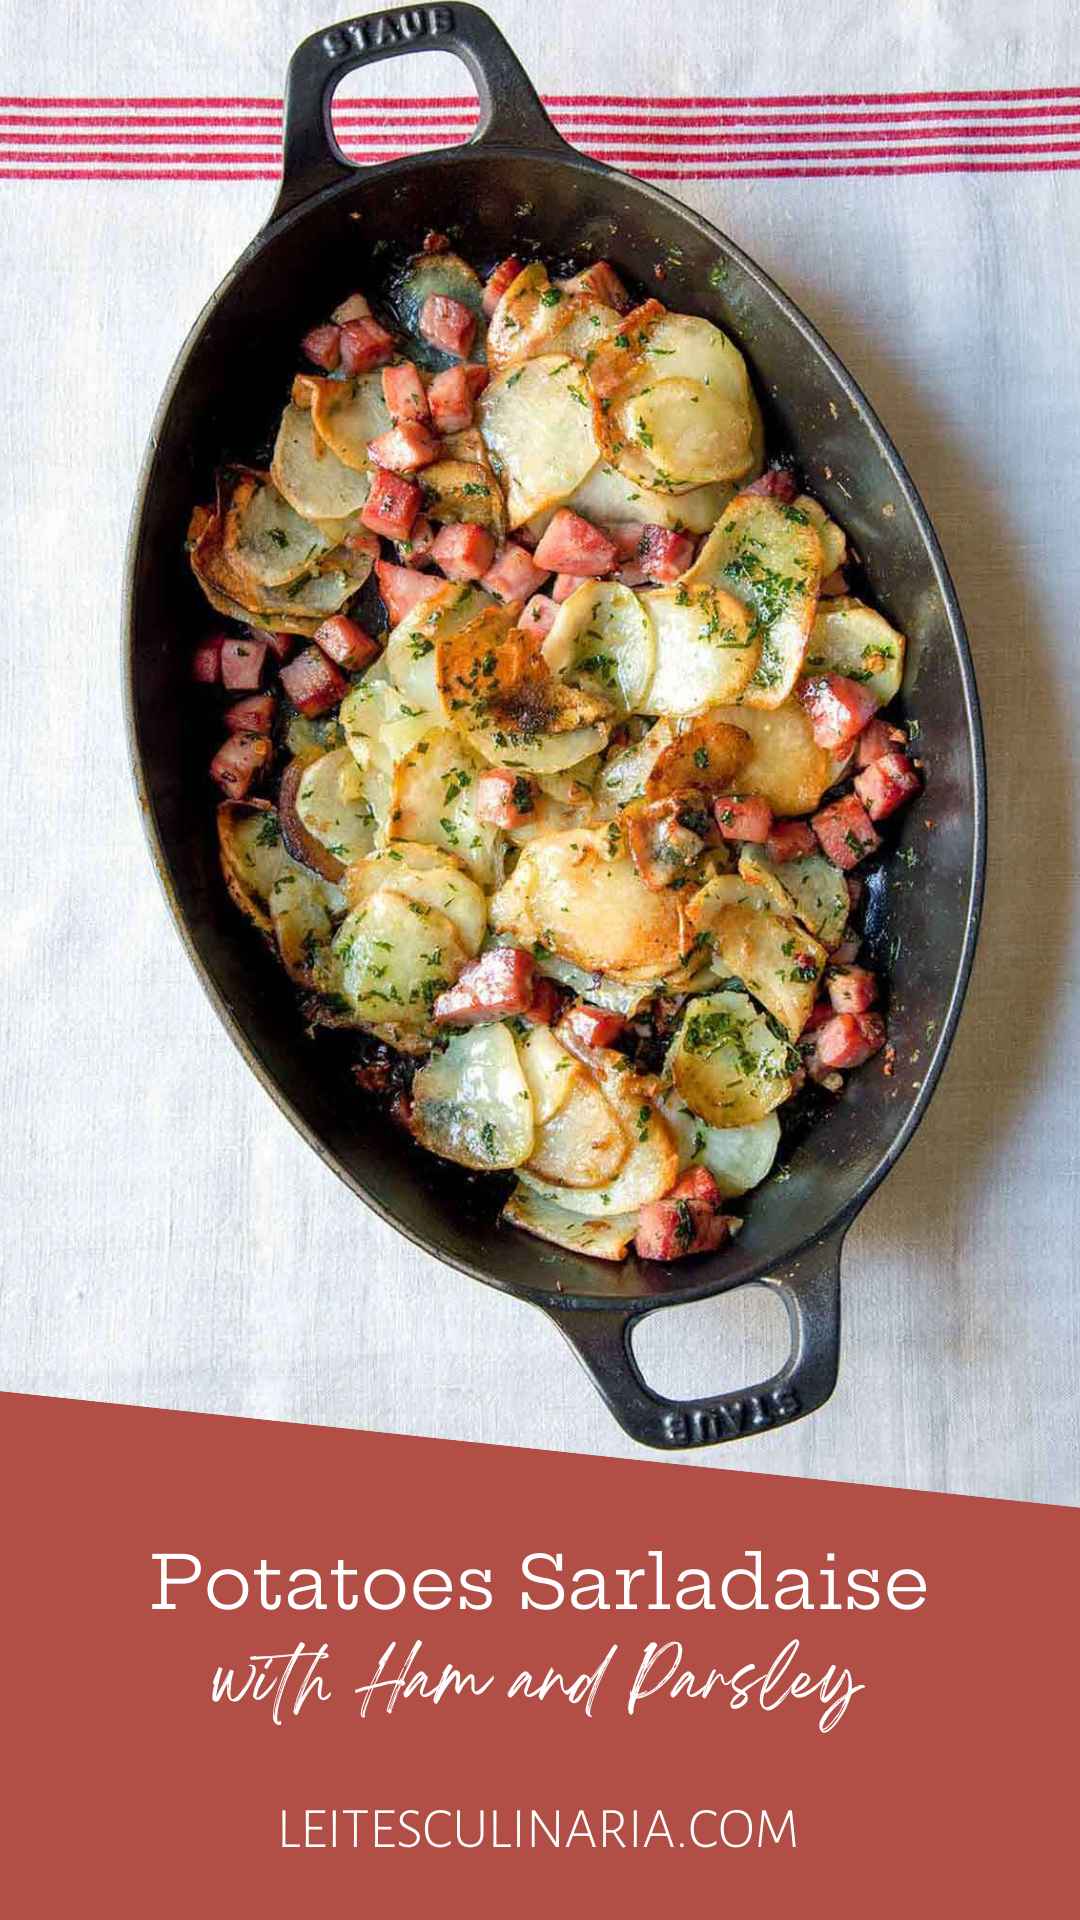 An oval casserole dish filled with cubed ham and thinly sliced potatoes sprinkled with parsley.